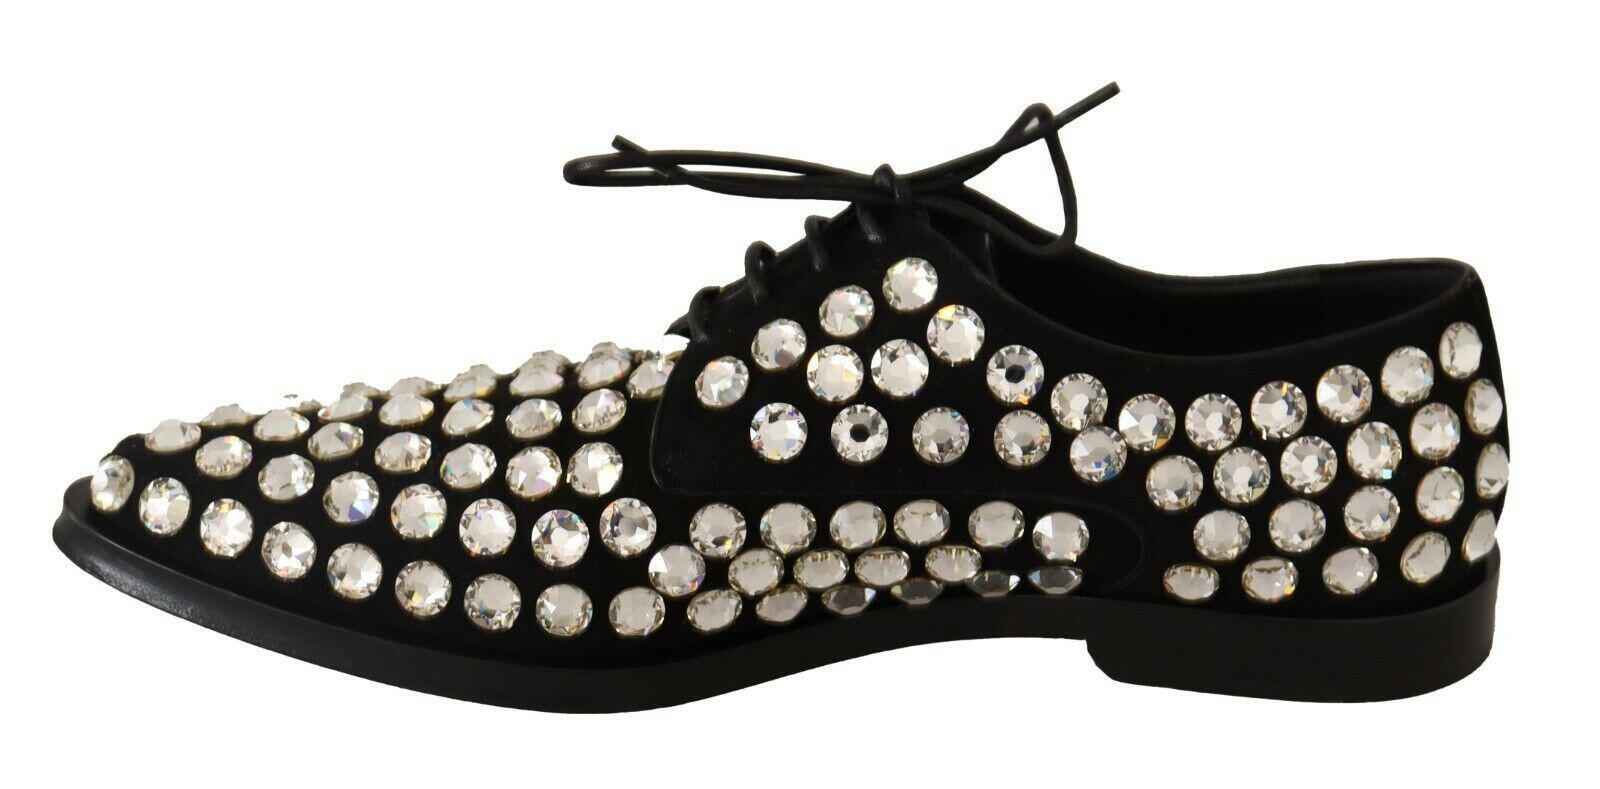 Dolce & Gabbana Black Leather Crystals Lace Up Formal Shoes - GENUINE AUTHENTIC BRAND LLC  